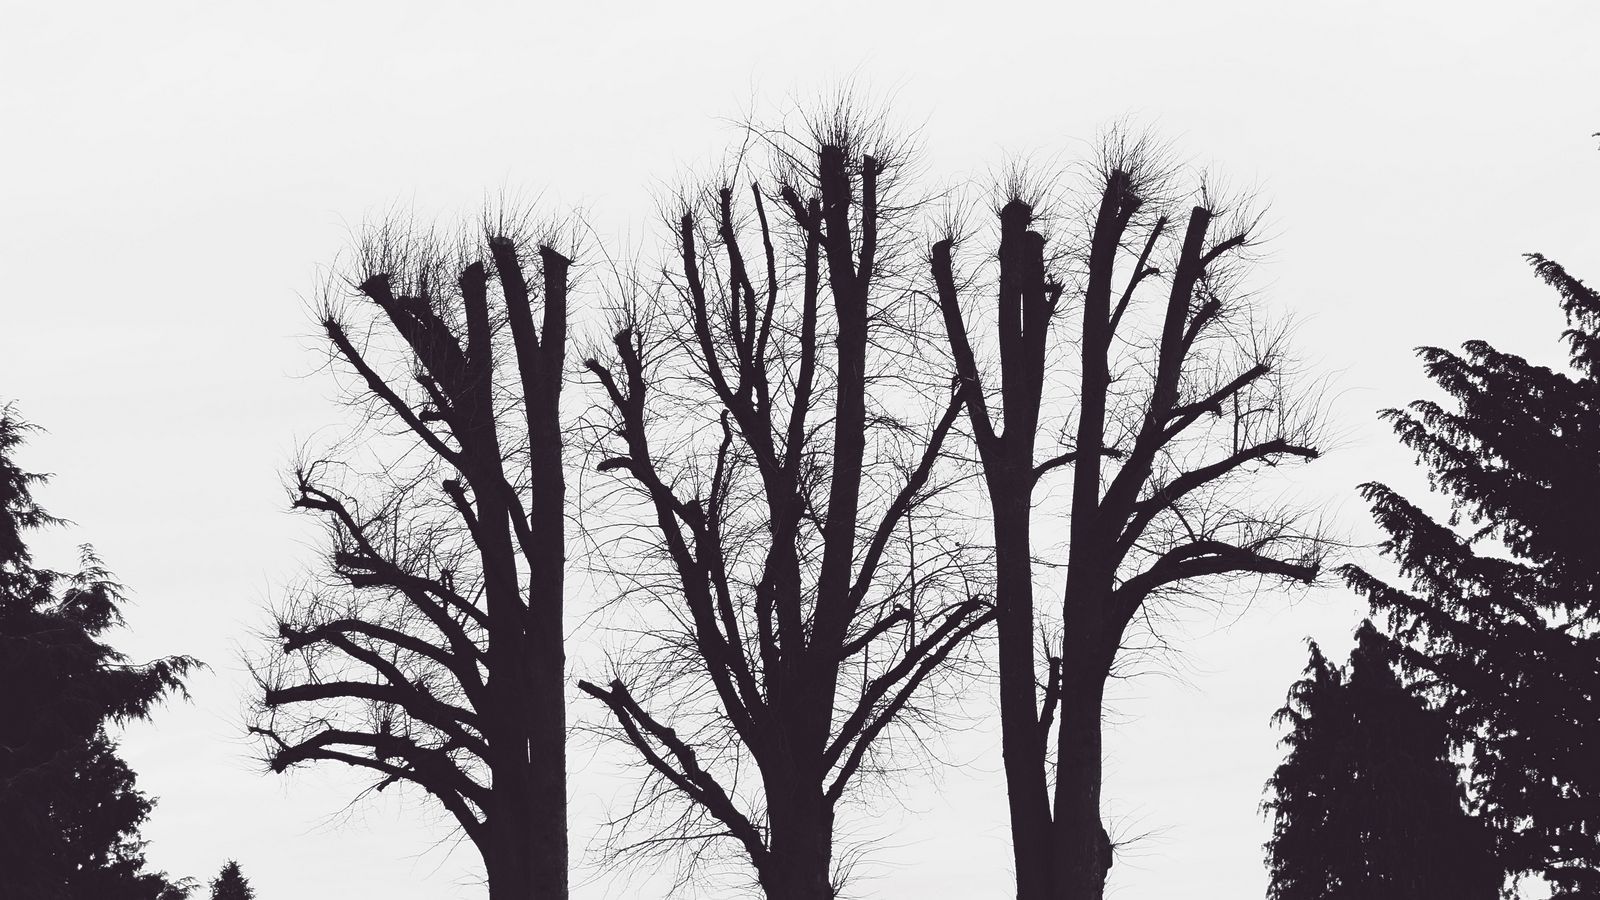 Download wallpaper 1600x900 trees, branches, aesthetic, bw